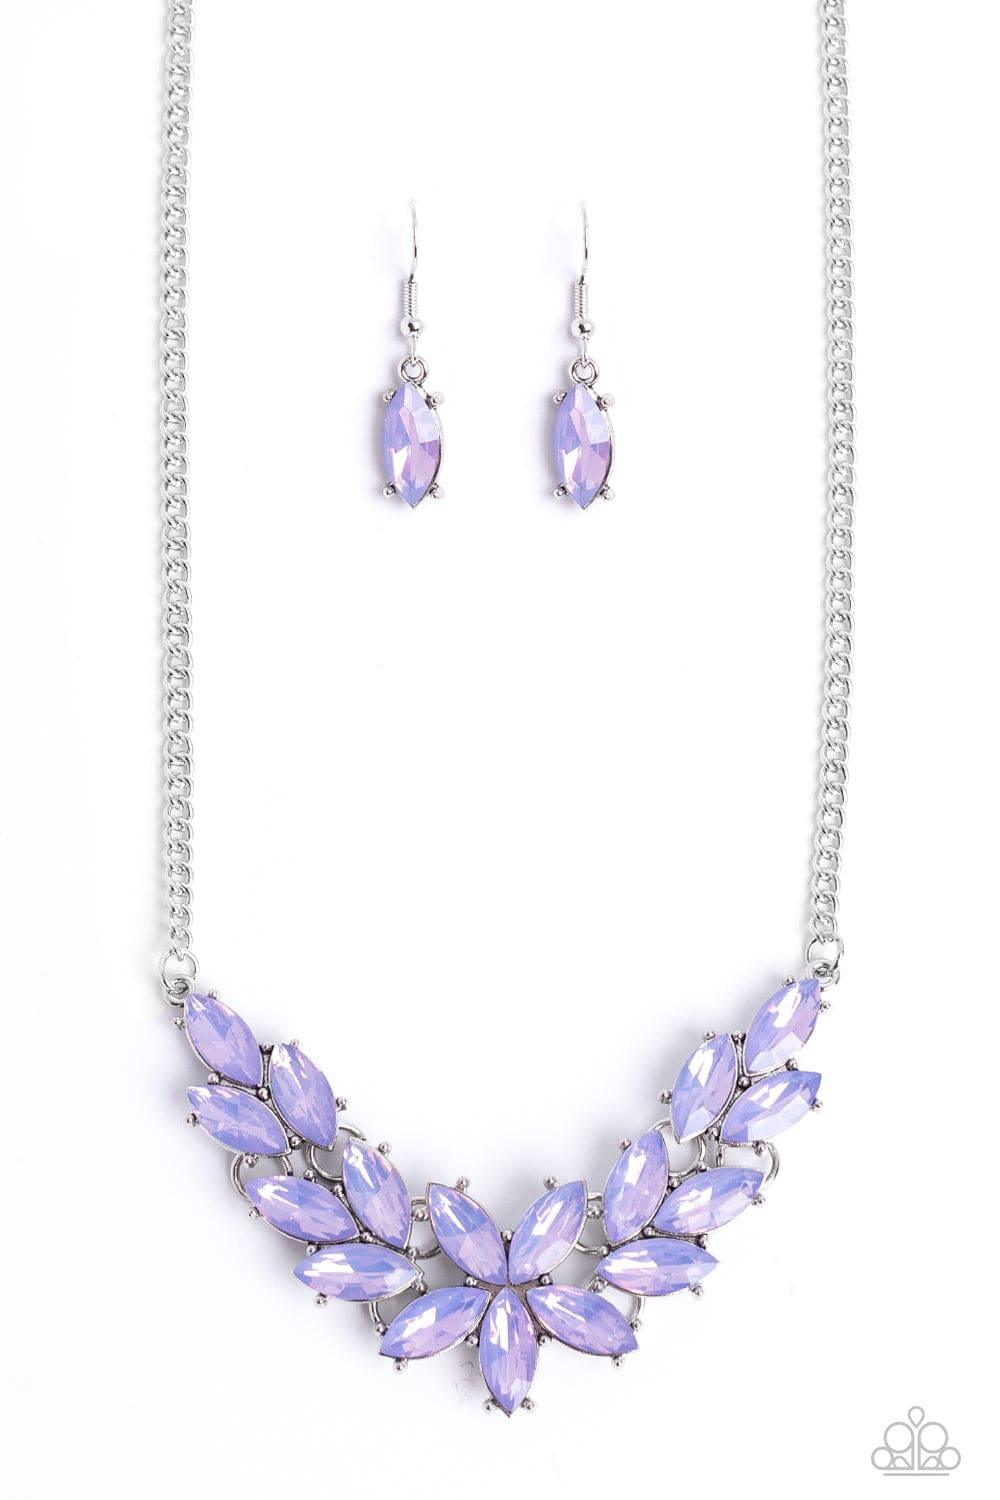 Paparazzi Accessories - Ethereal Efflorescence - Purple Necklace - Bling by JessieK